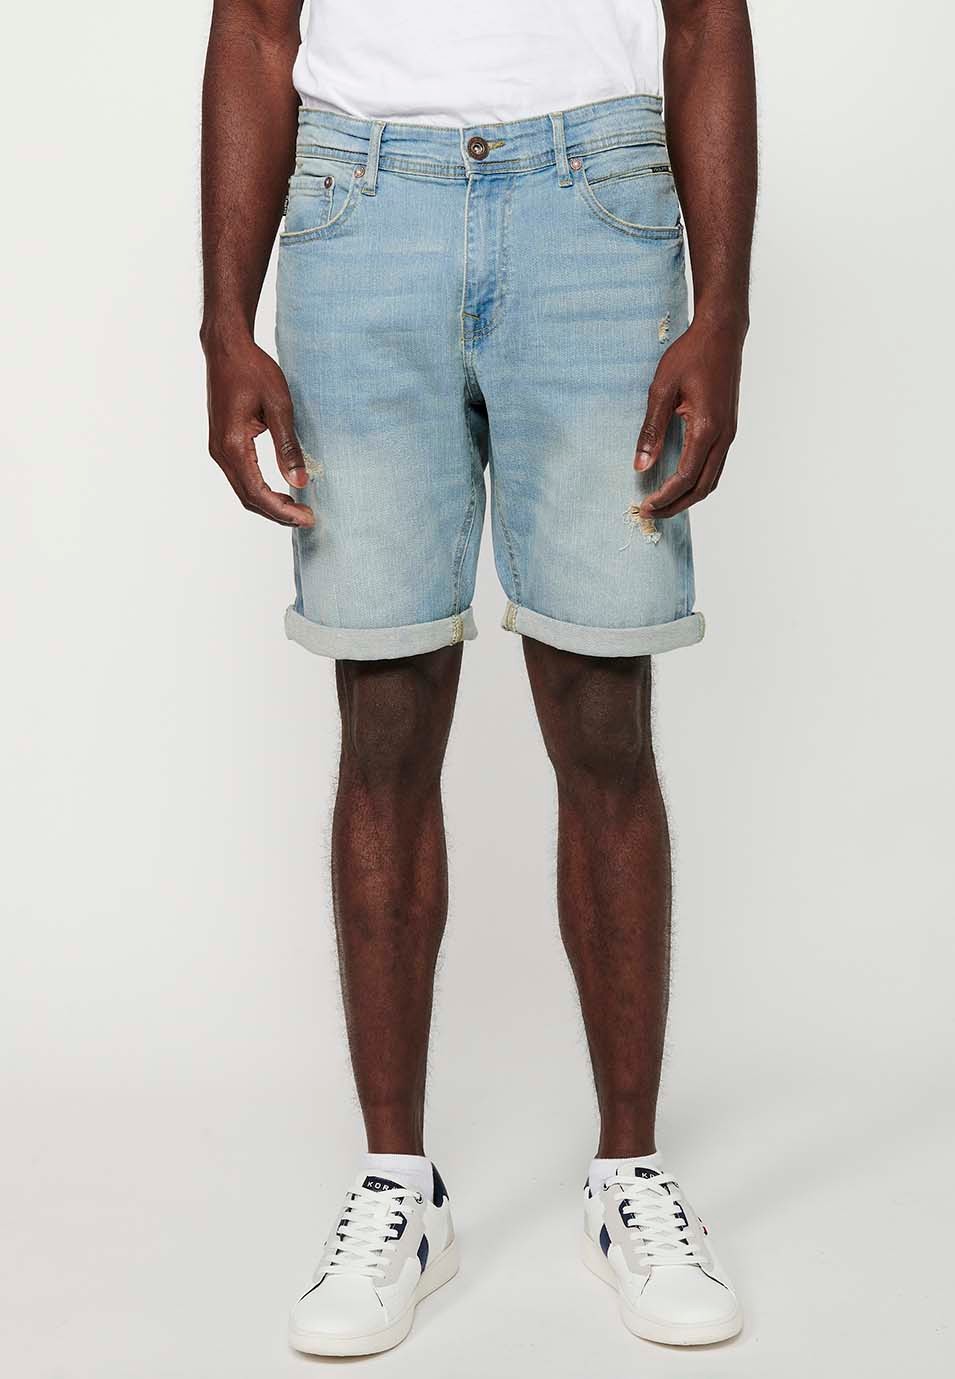 Shorts with turn-up finish and front closure with zipper and button and five pockets, one blue pocket pocket for men 3